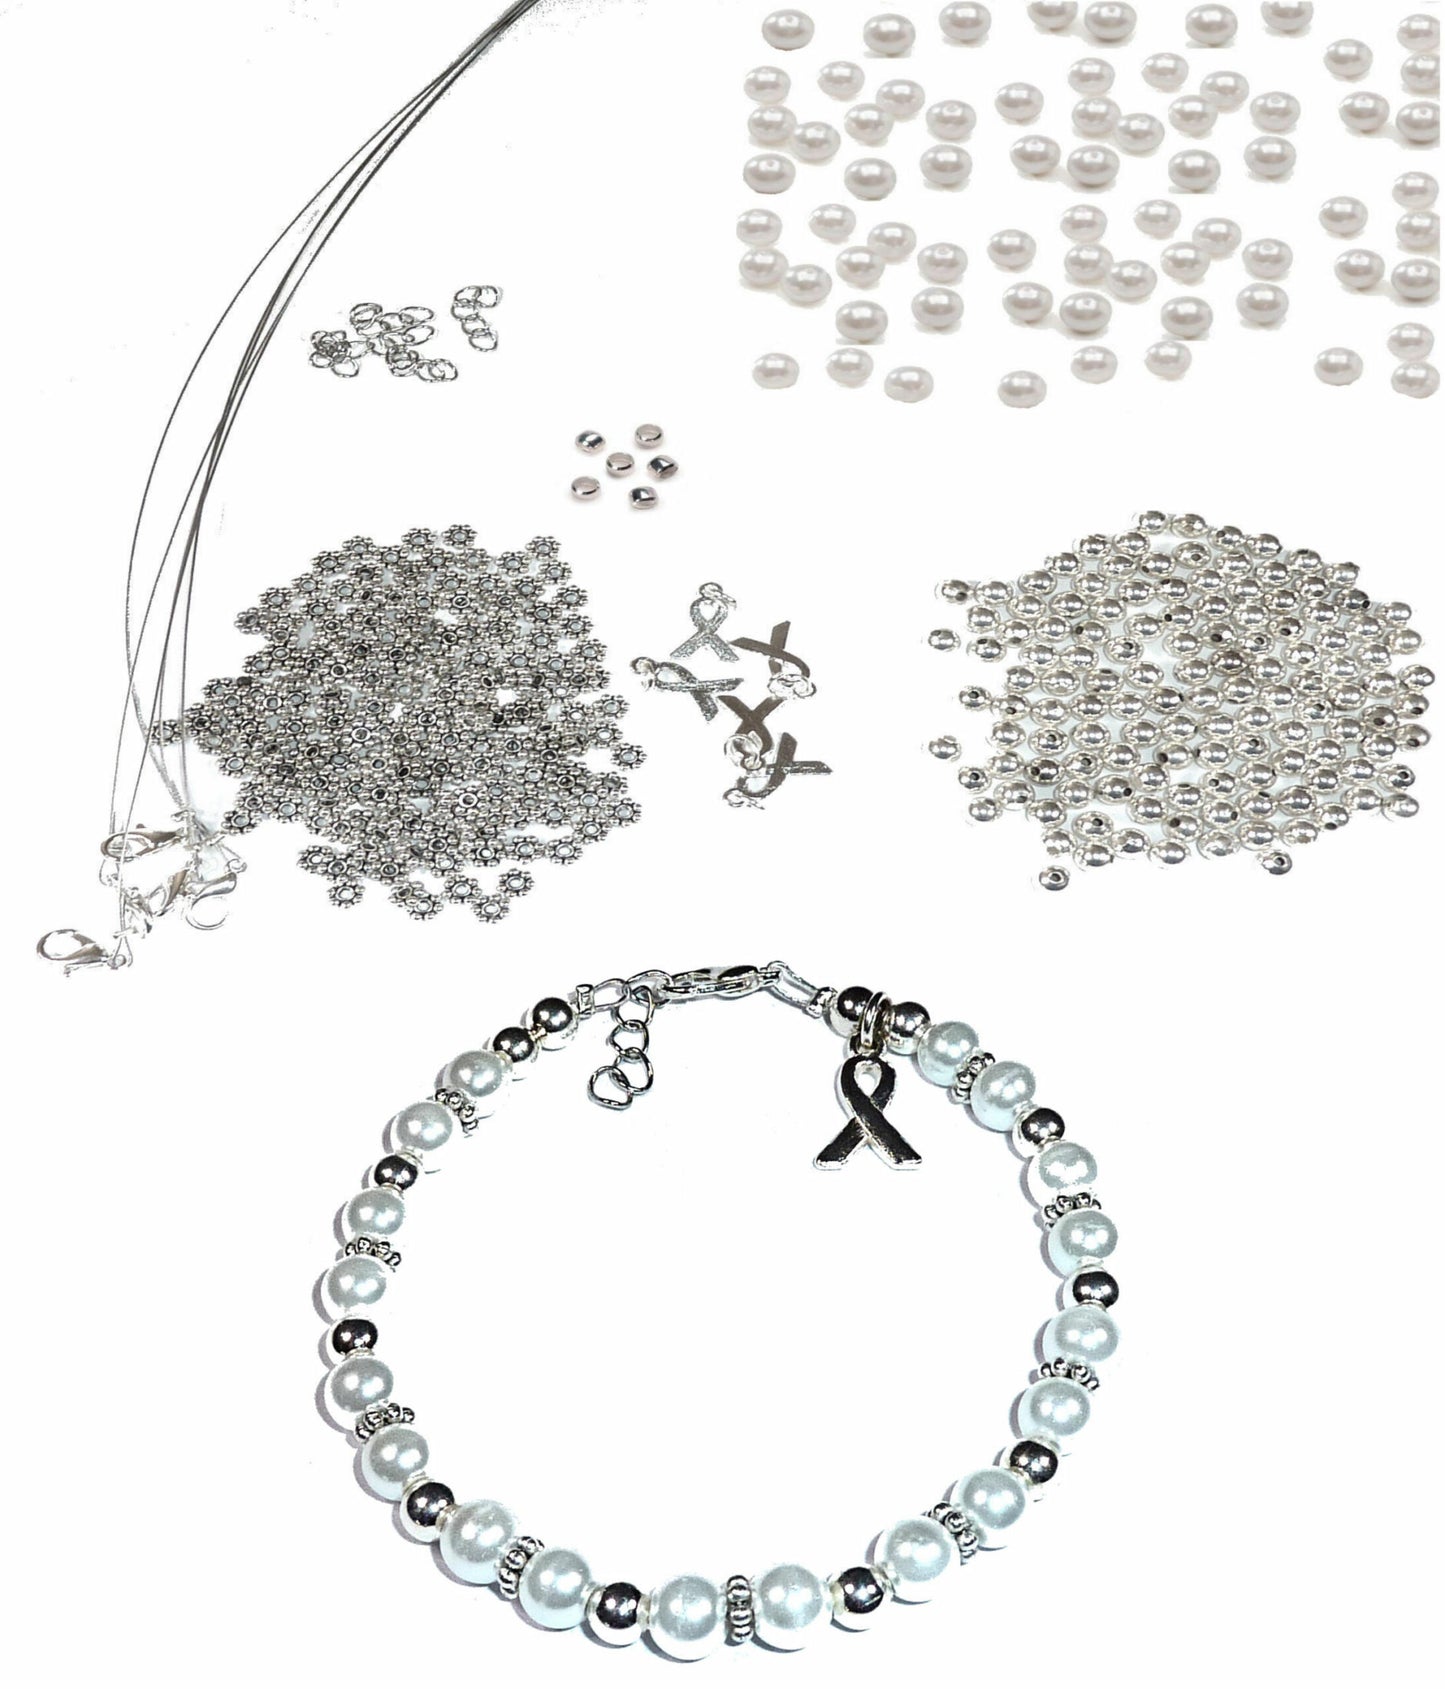 DIY Kit, Everything You Need to Make Cancer Awareness Bracelets, Uses Wire, Crimps and Clasps, Makes 5 - White Pearl (Lung Cancer)